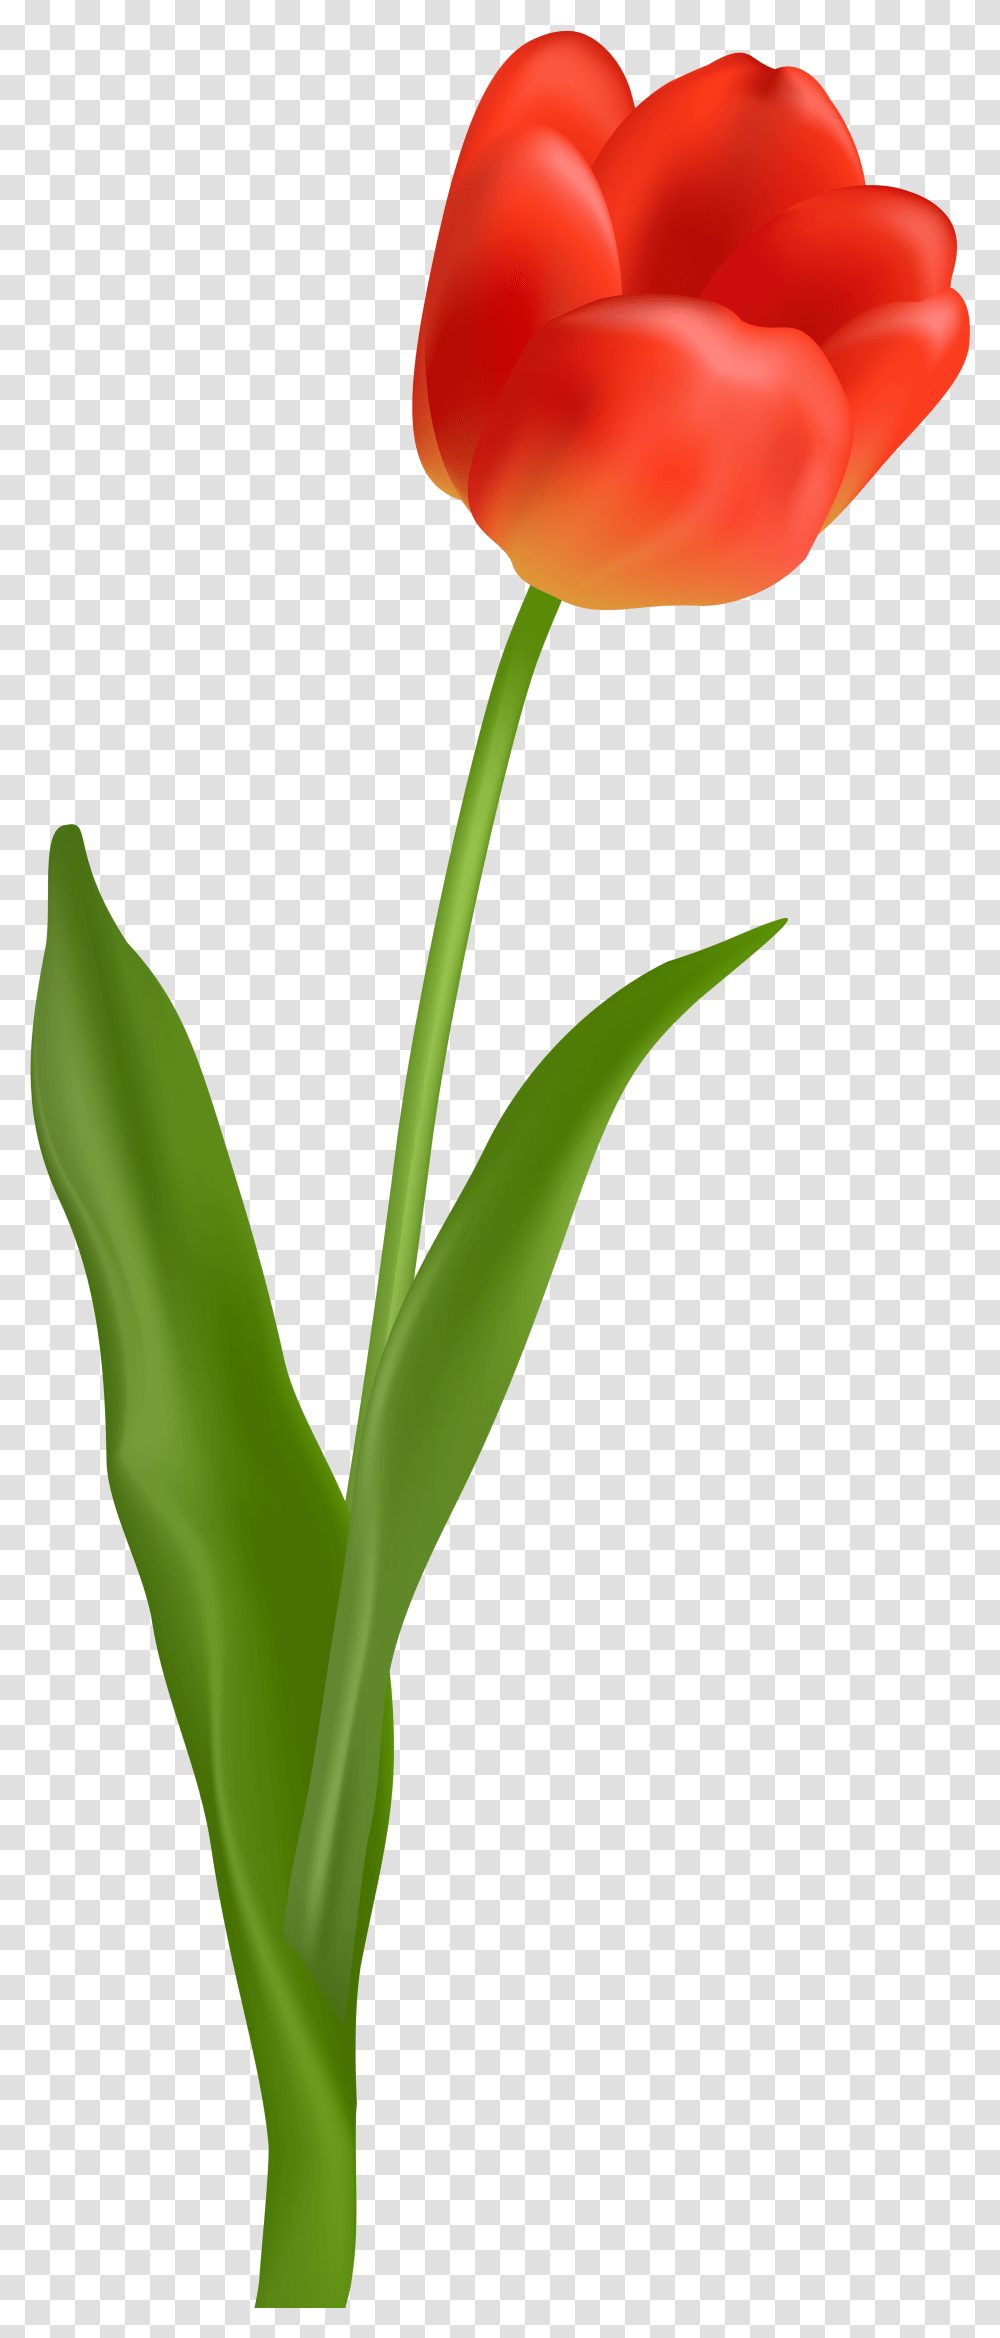 Download Flower With Stem Picture Red Tulip Flower, Plant, Blossom, Vegetable, Food Transparent Png